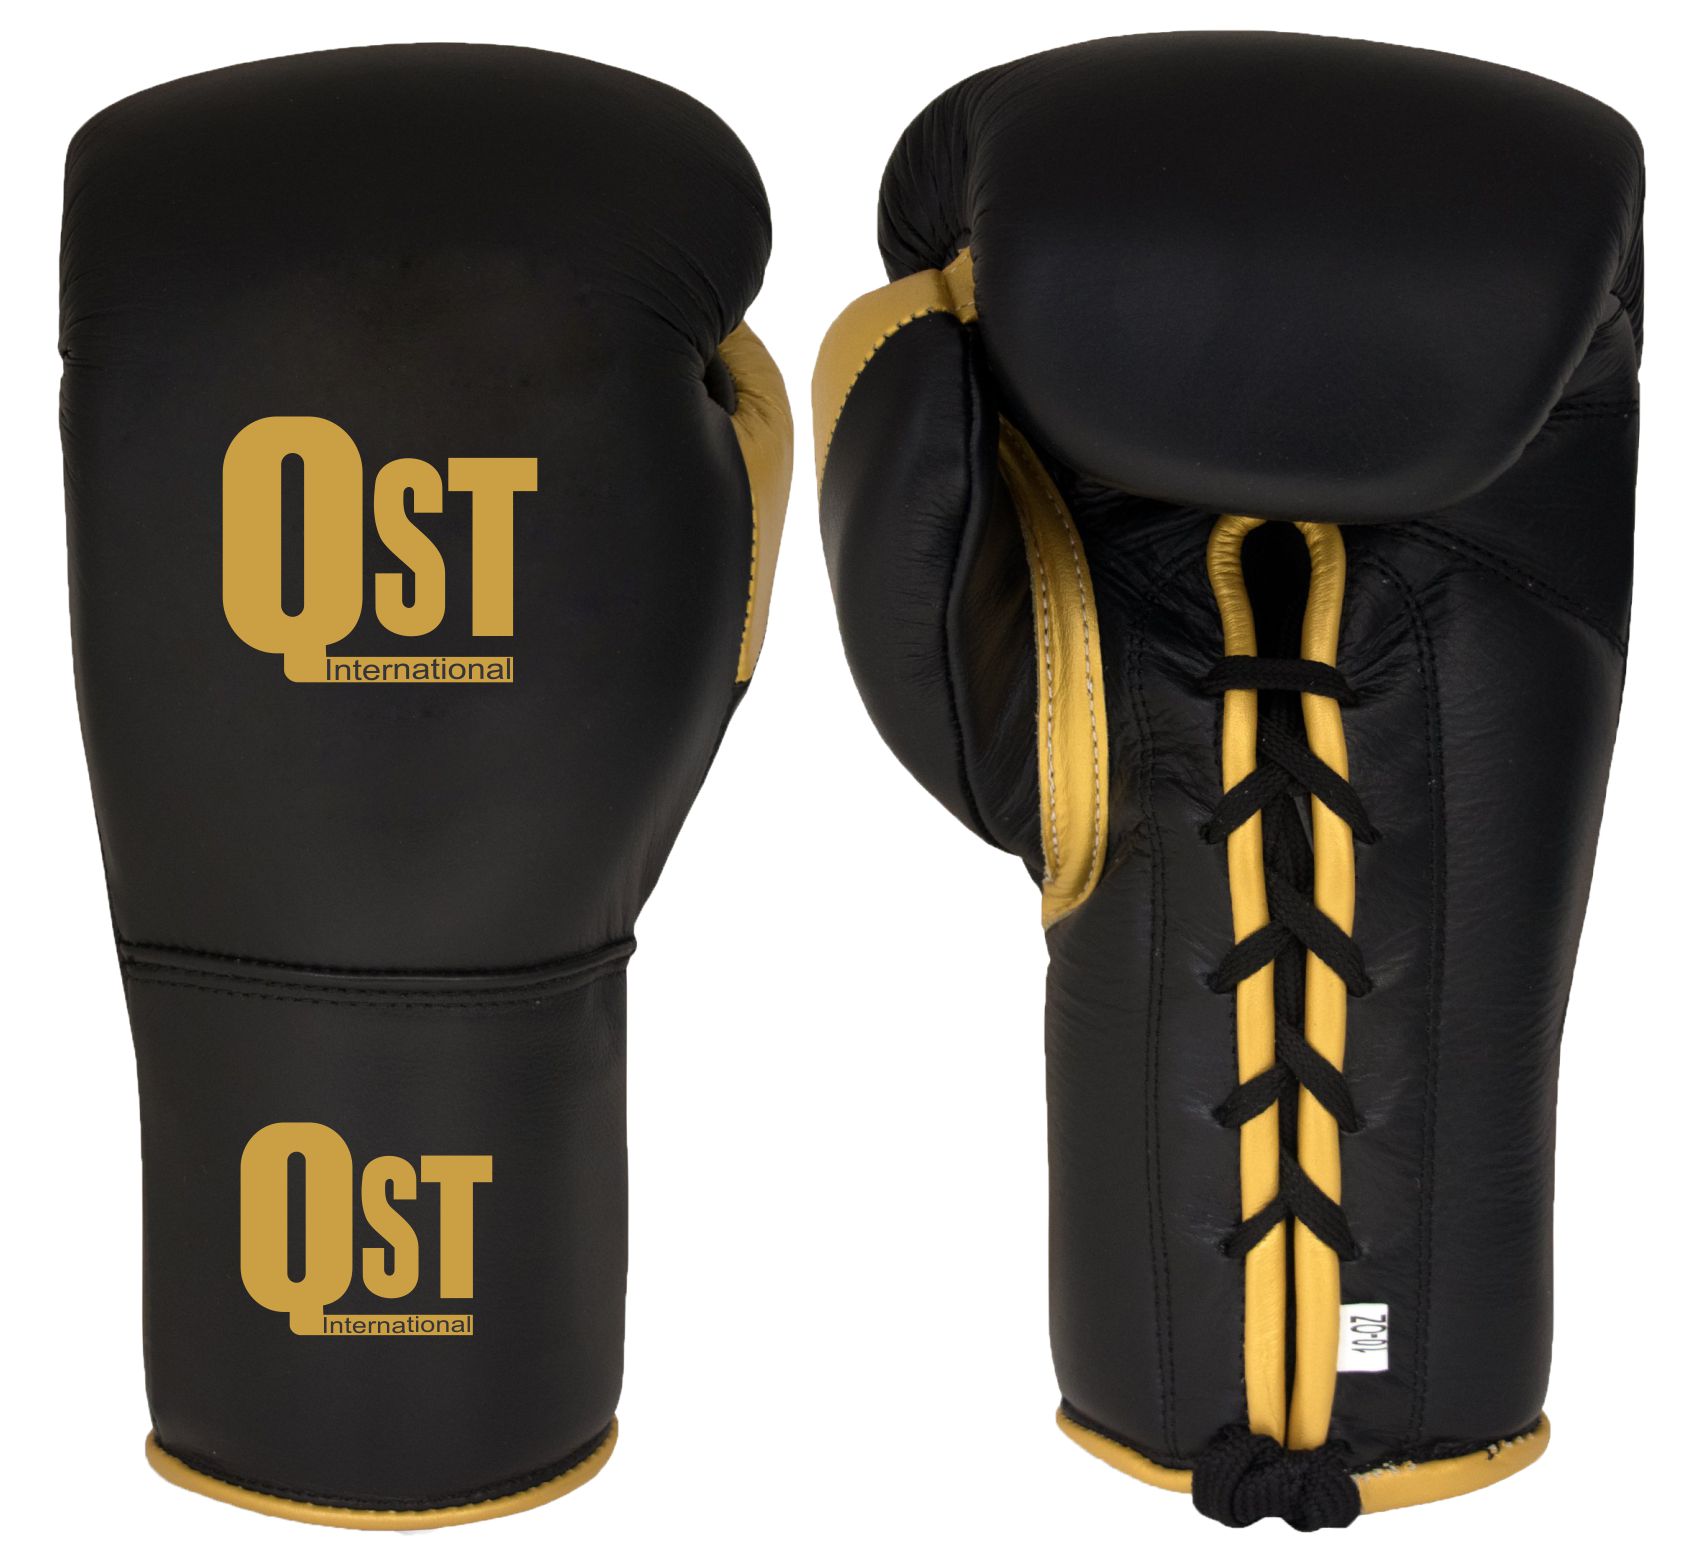 Lace up Boxing Gloves - PRG-3253